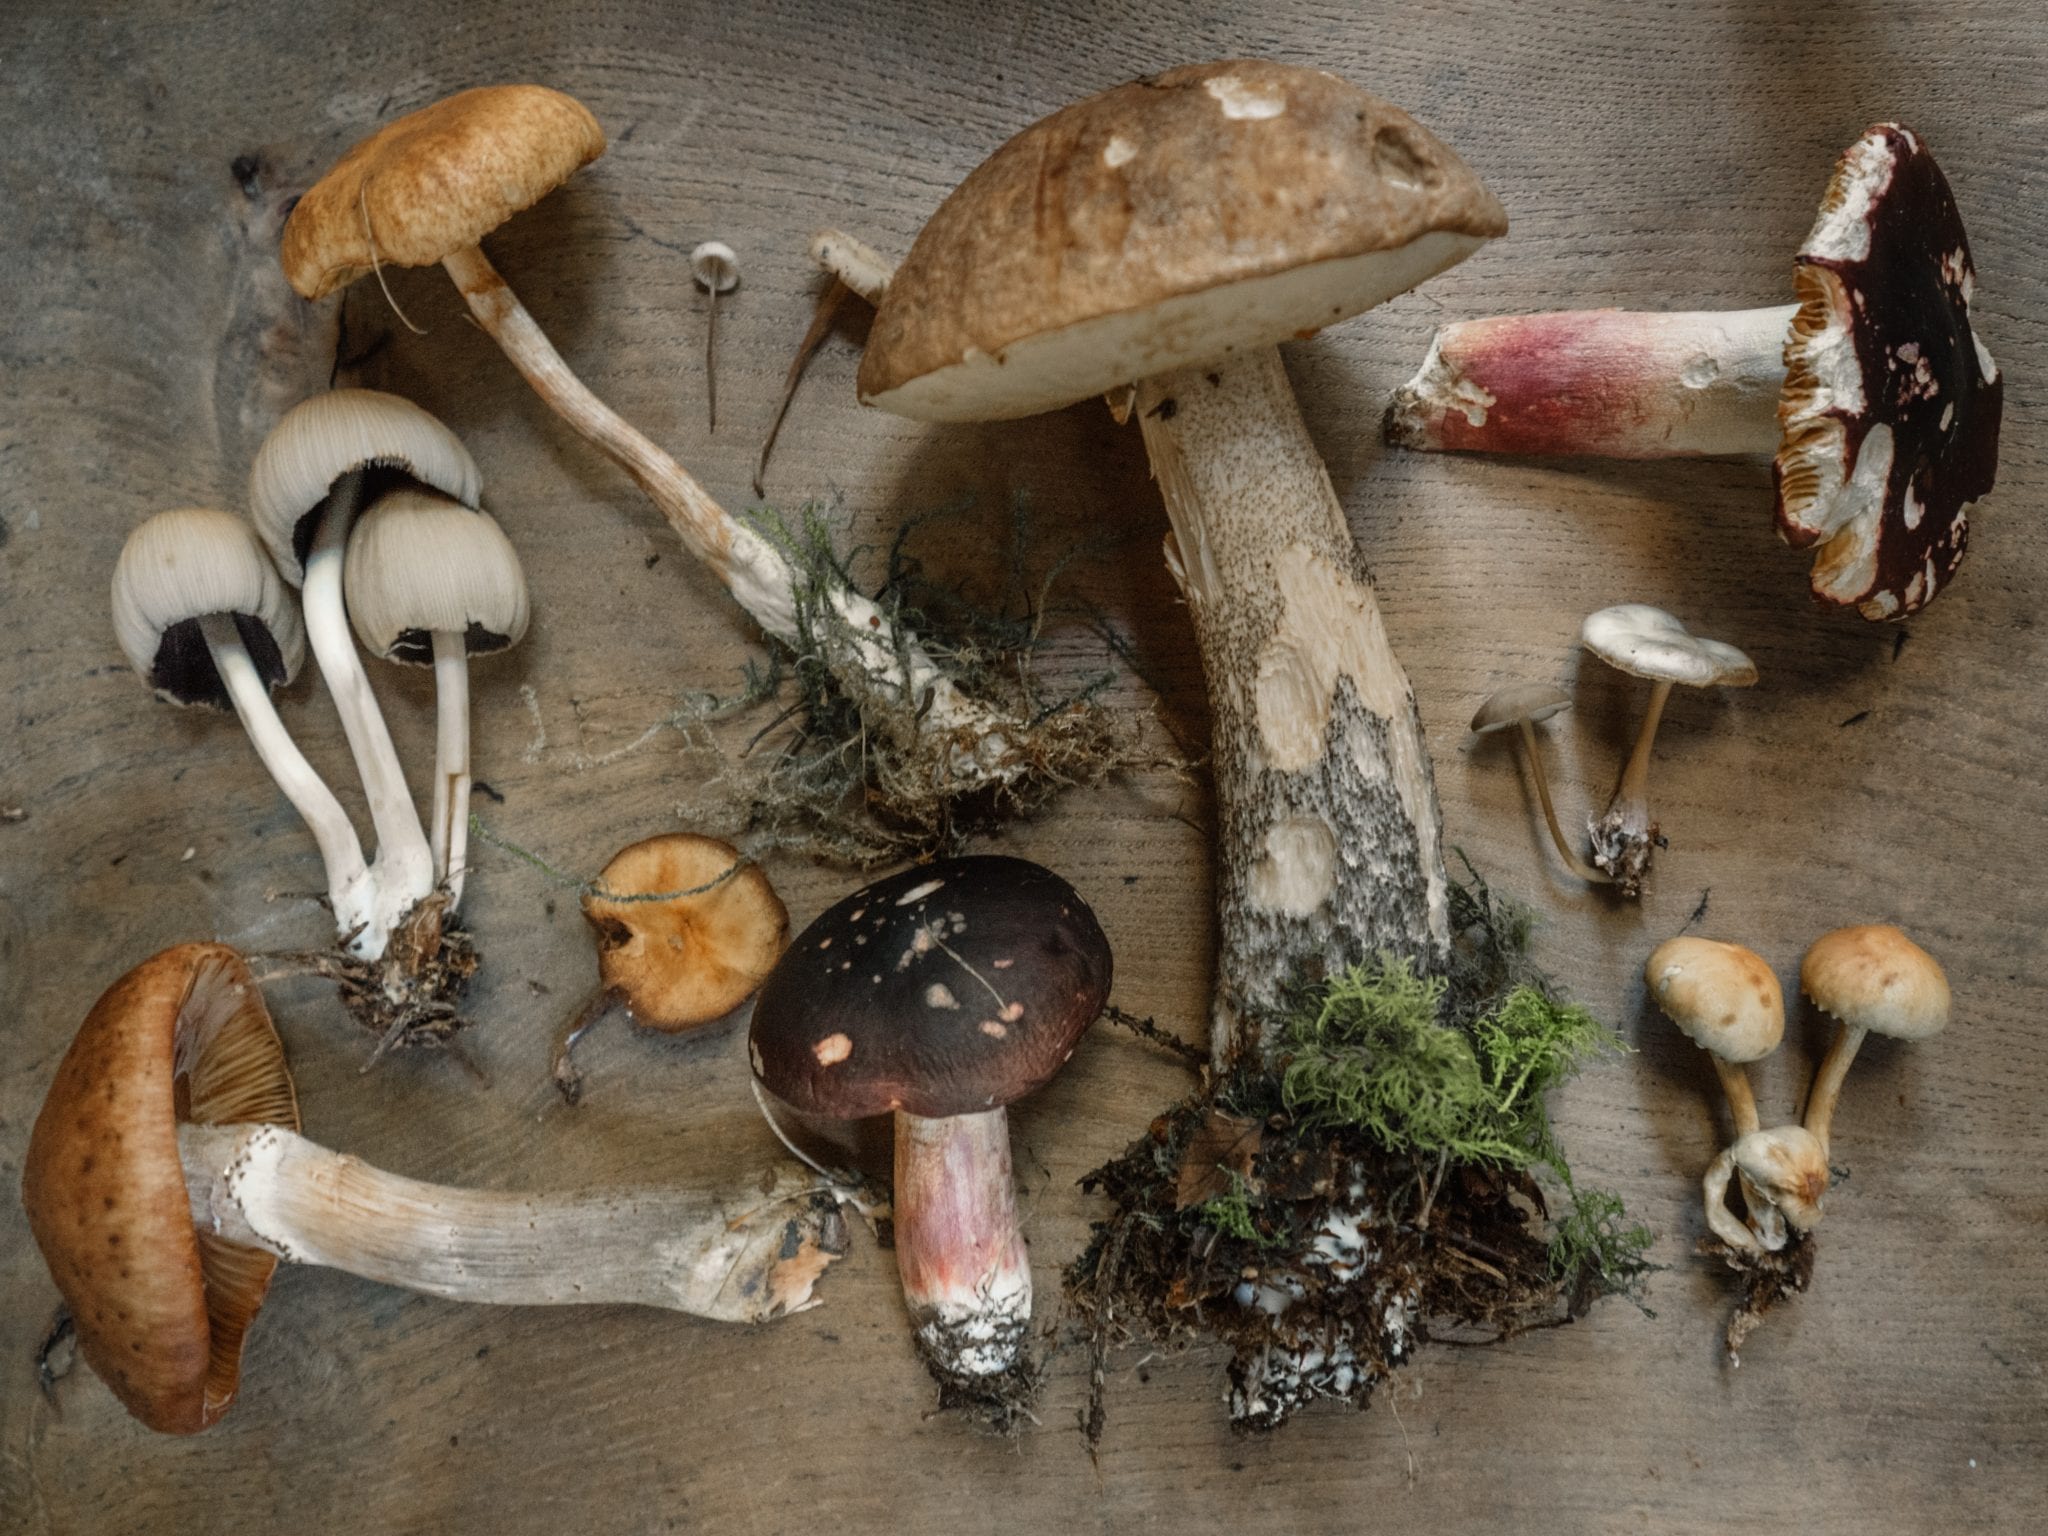 Mushrooms and various fungi displayed on a wooden table